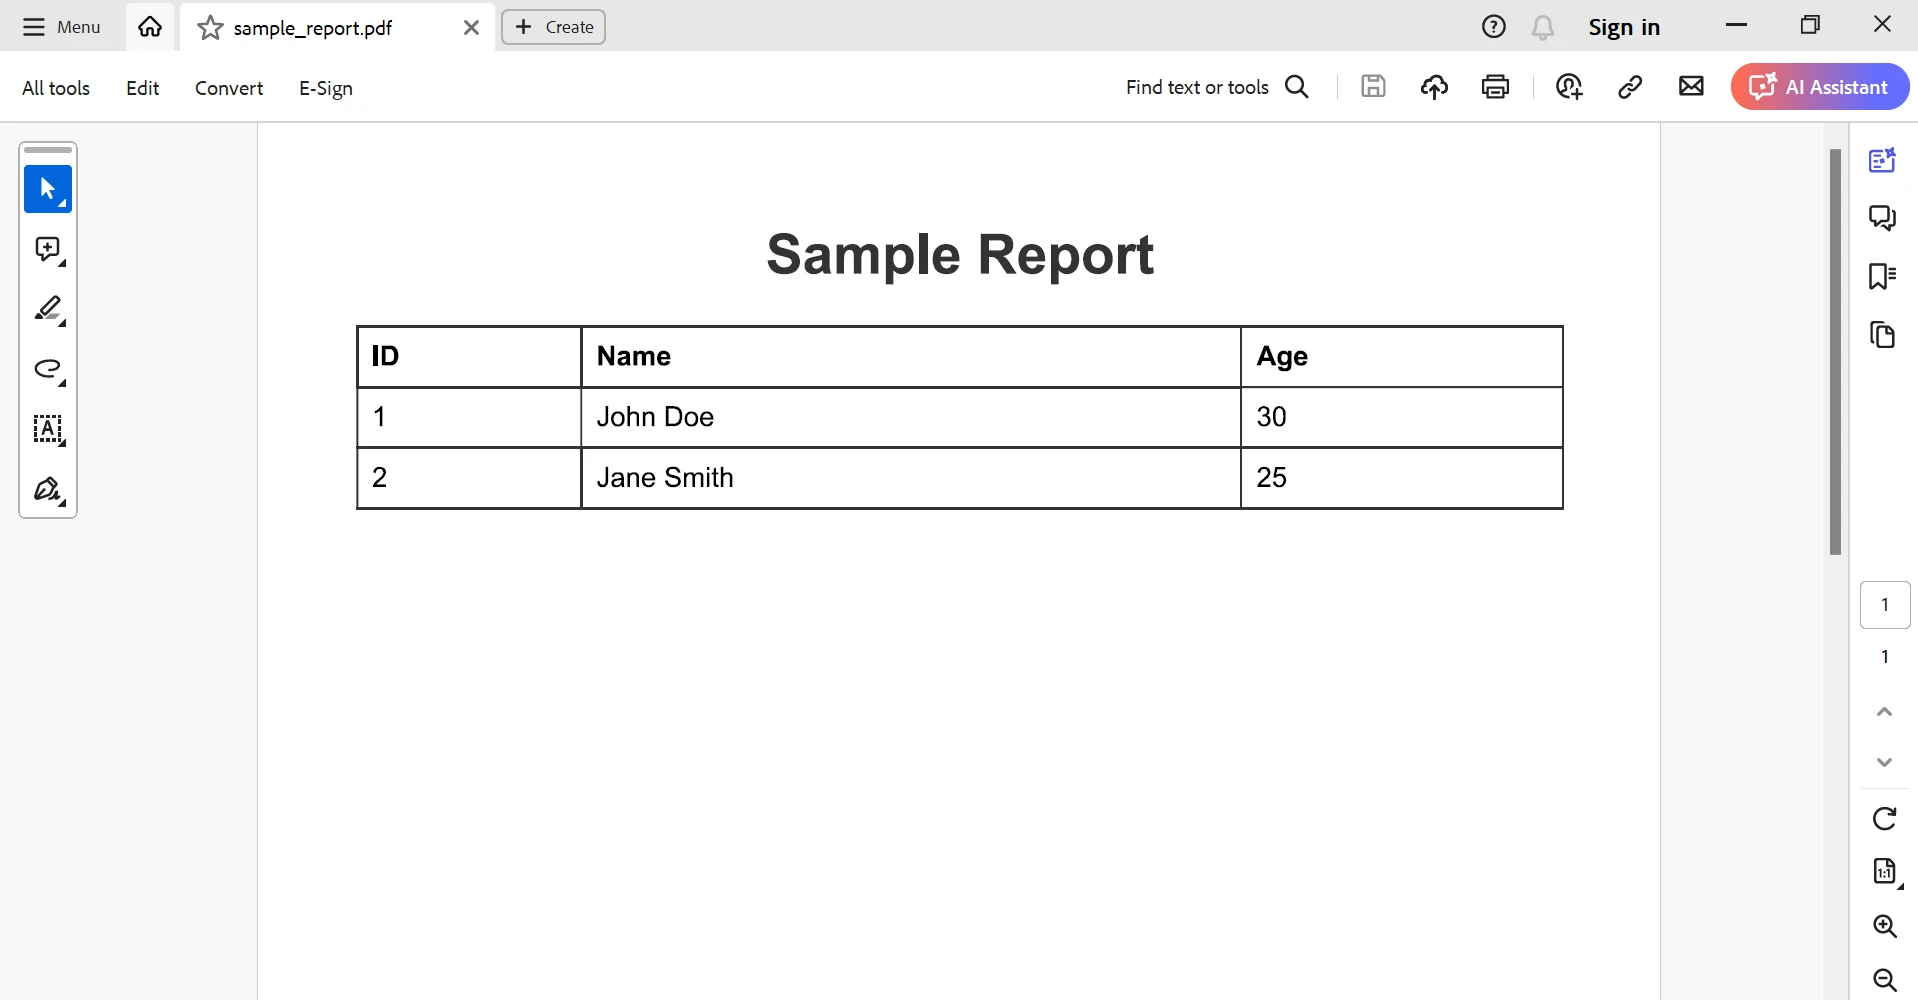 C# Reporting Tools (Features Comparison): Figure 3 - Reporting Features PDF Output